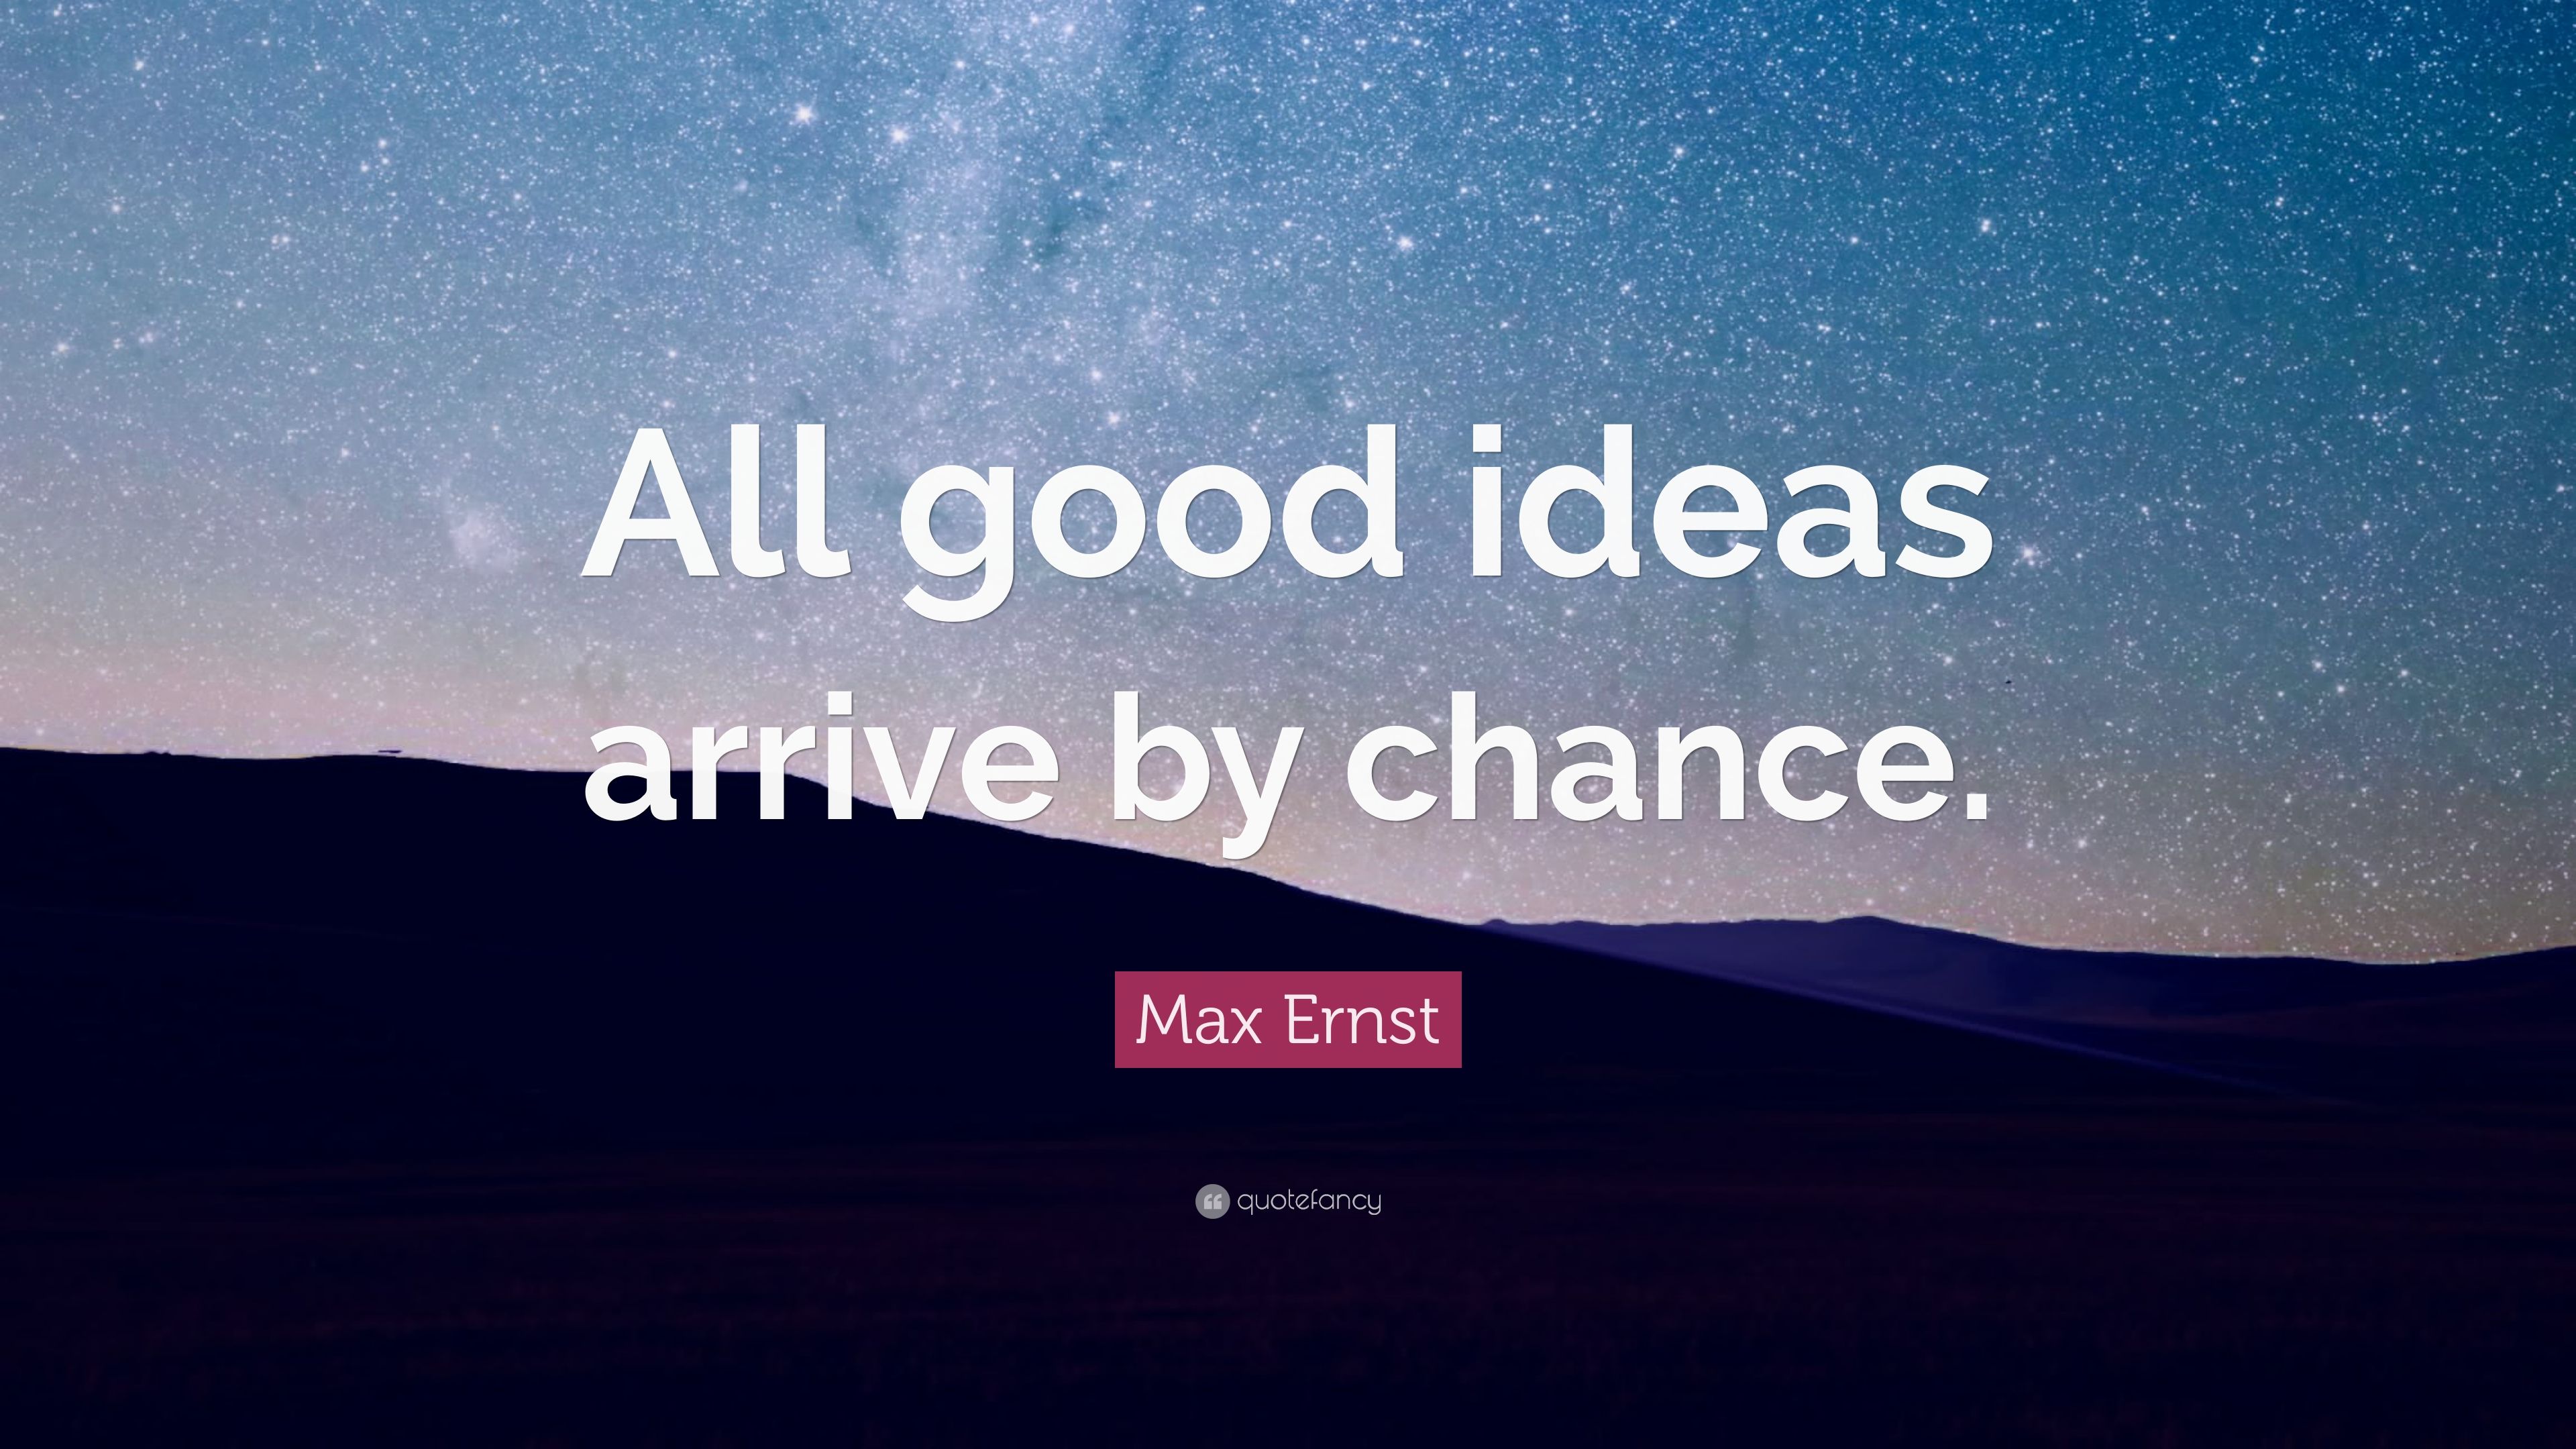 Max Ernst Quote: “All good ideas arrive by chance.” 7 wallpaper